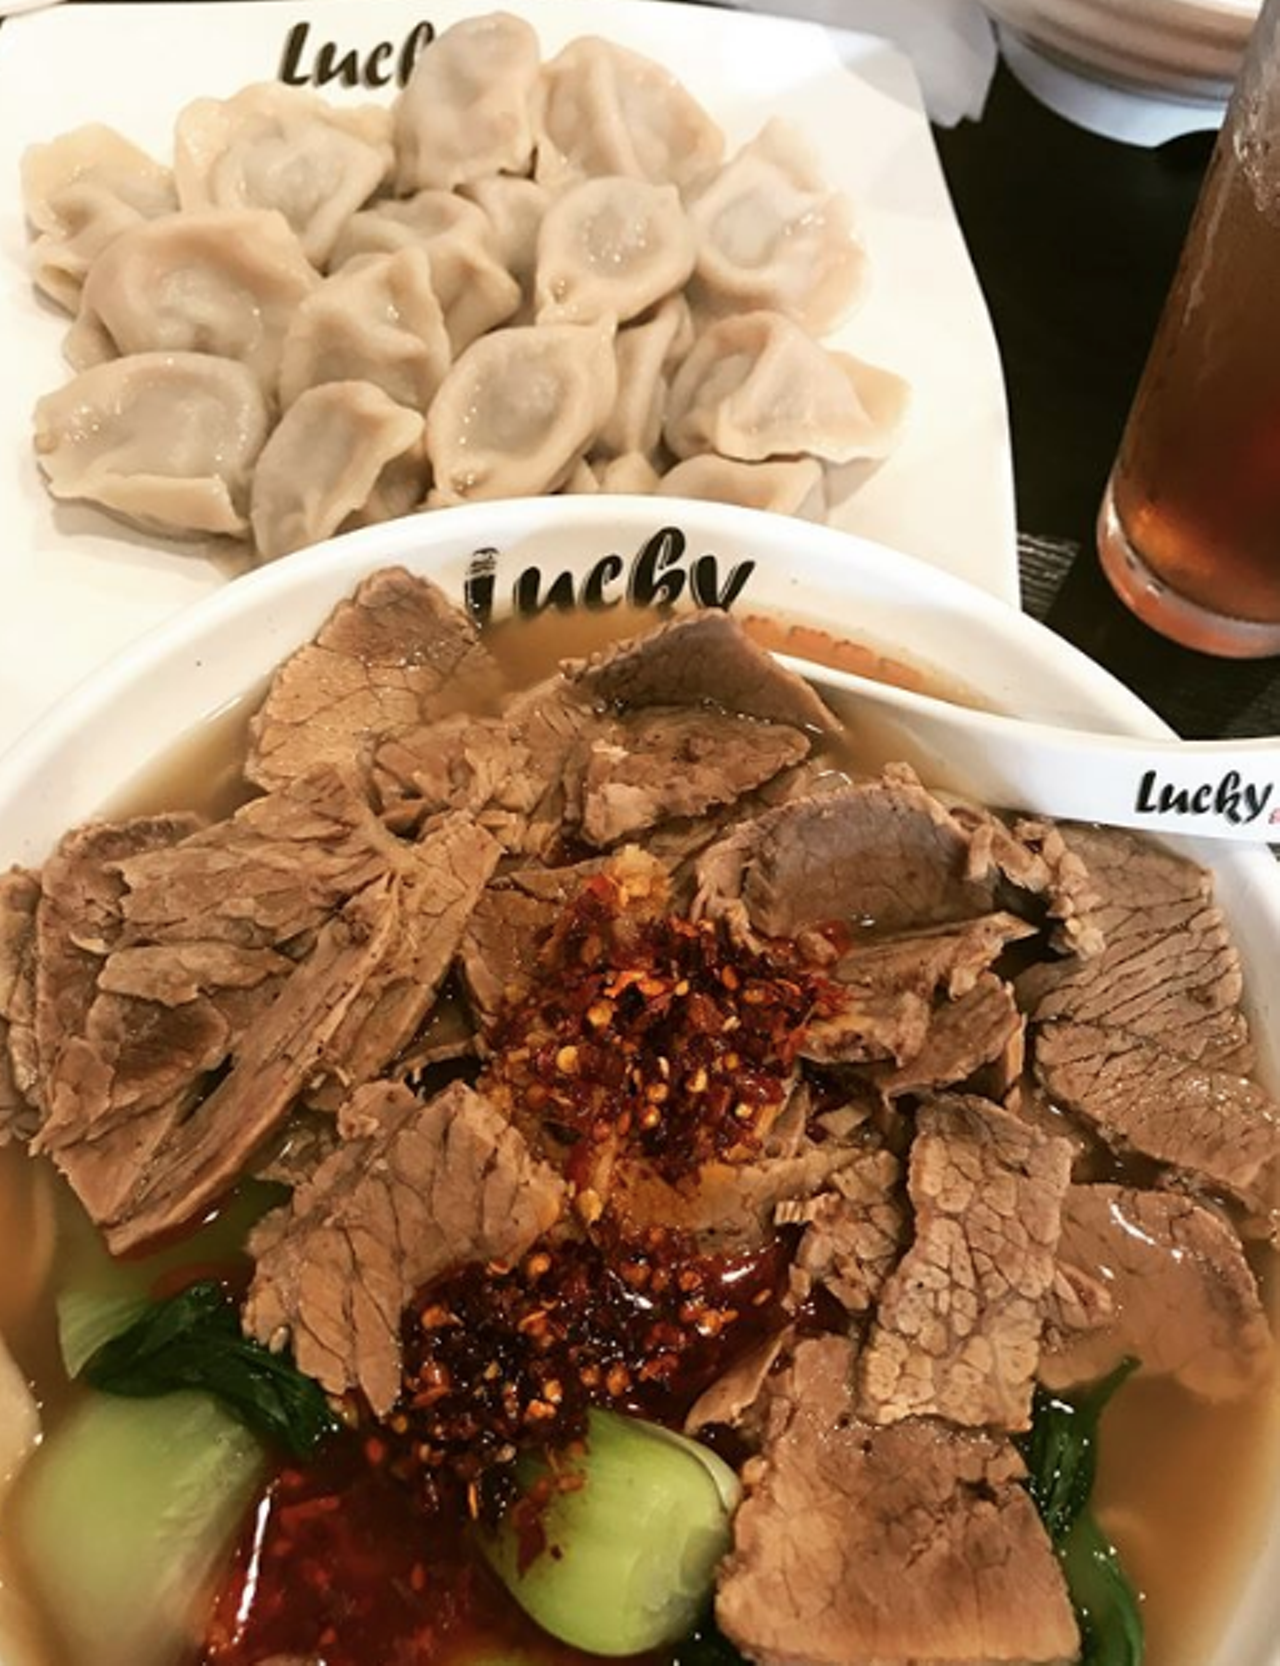 Lucky Noodle
8525 Blanco Road, (210) 267-9717
When compared to its predecessor off Bandera Road, Lucky Noodle features more than 1,500 square feet of seating and an open kitchen area — so you can watch the noodles being pulled and stretched. Consider it dinner and a show.
Photo via Instagram / eatswithtrang